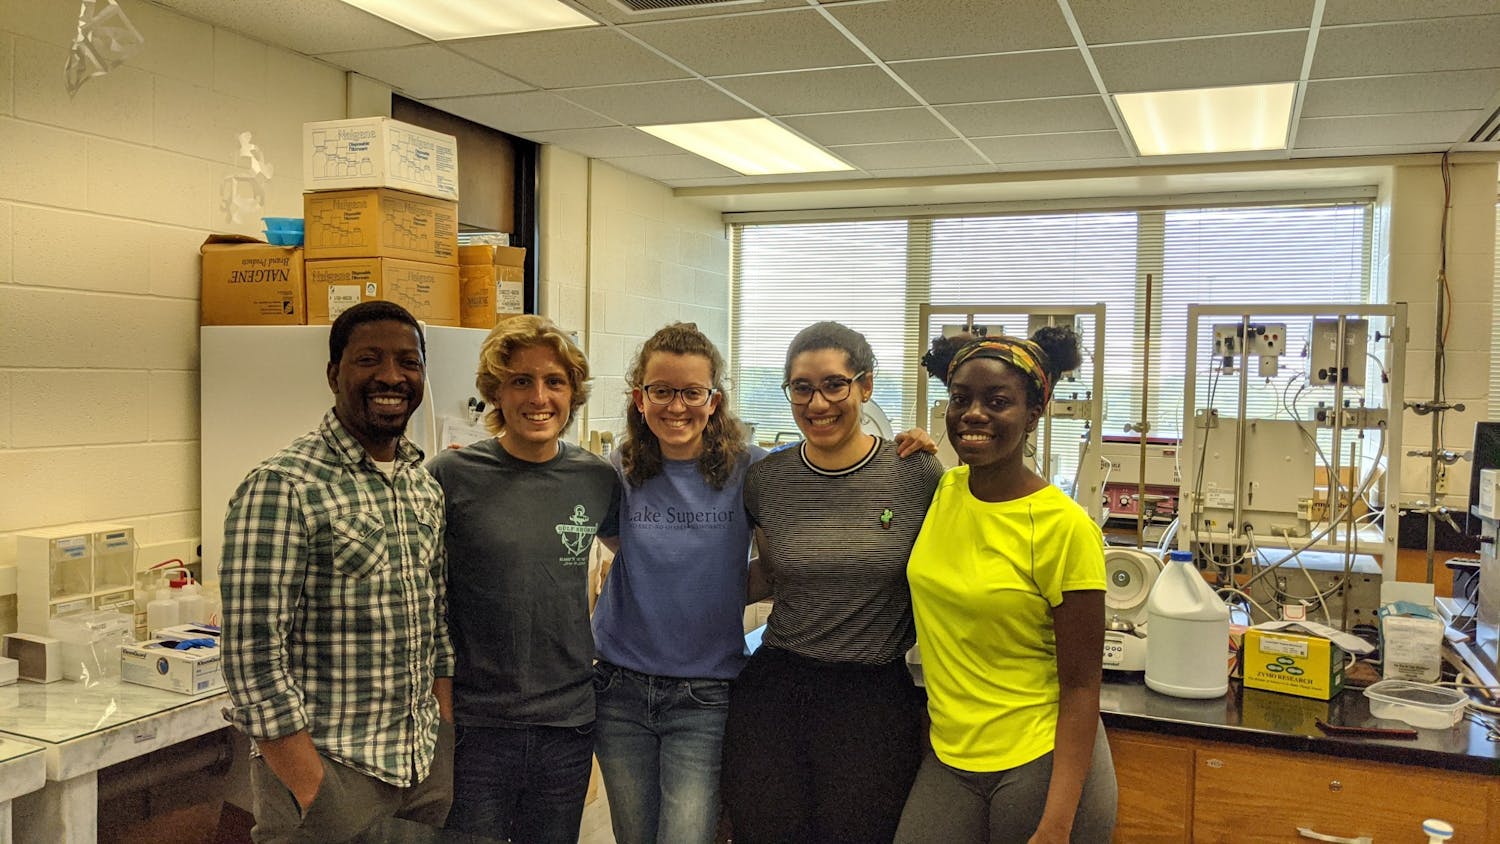 Daniel Kaluka, Alex Helmuth, Elaine Christian, Kendra Russell and Tia Watkins worked together this summer on campus.